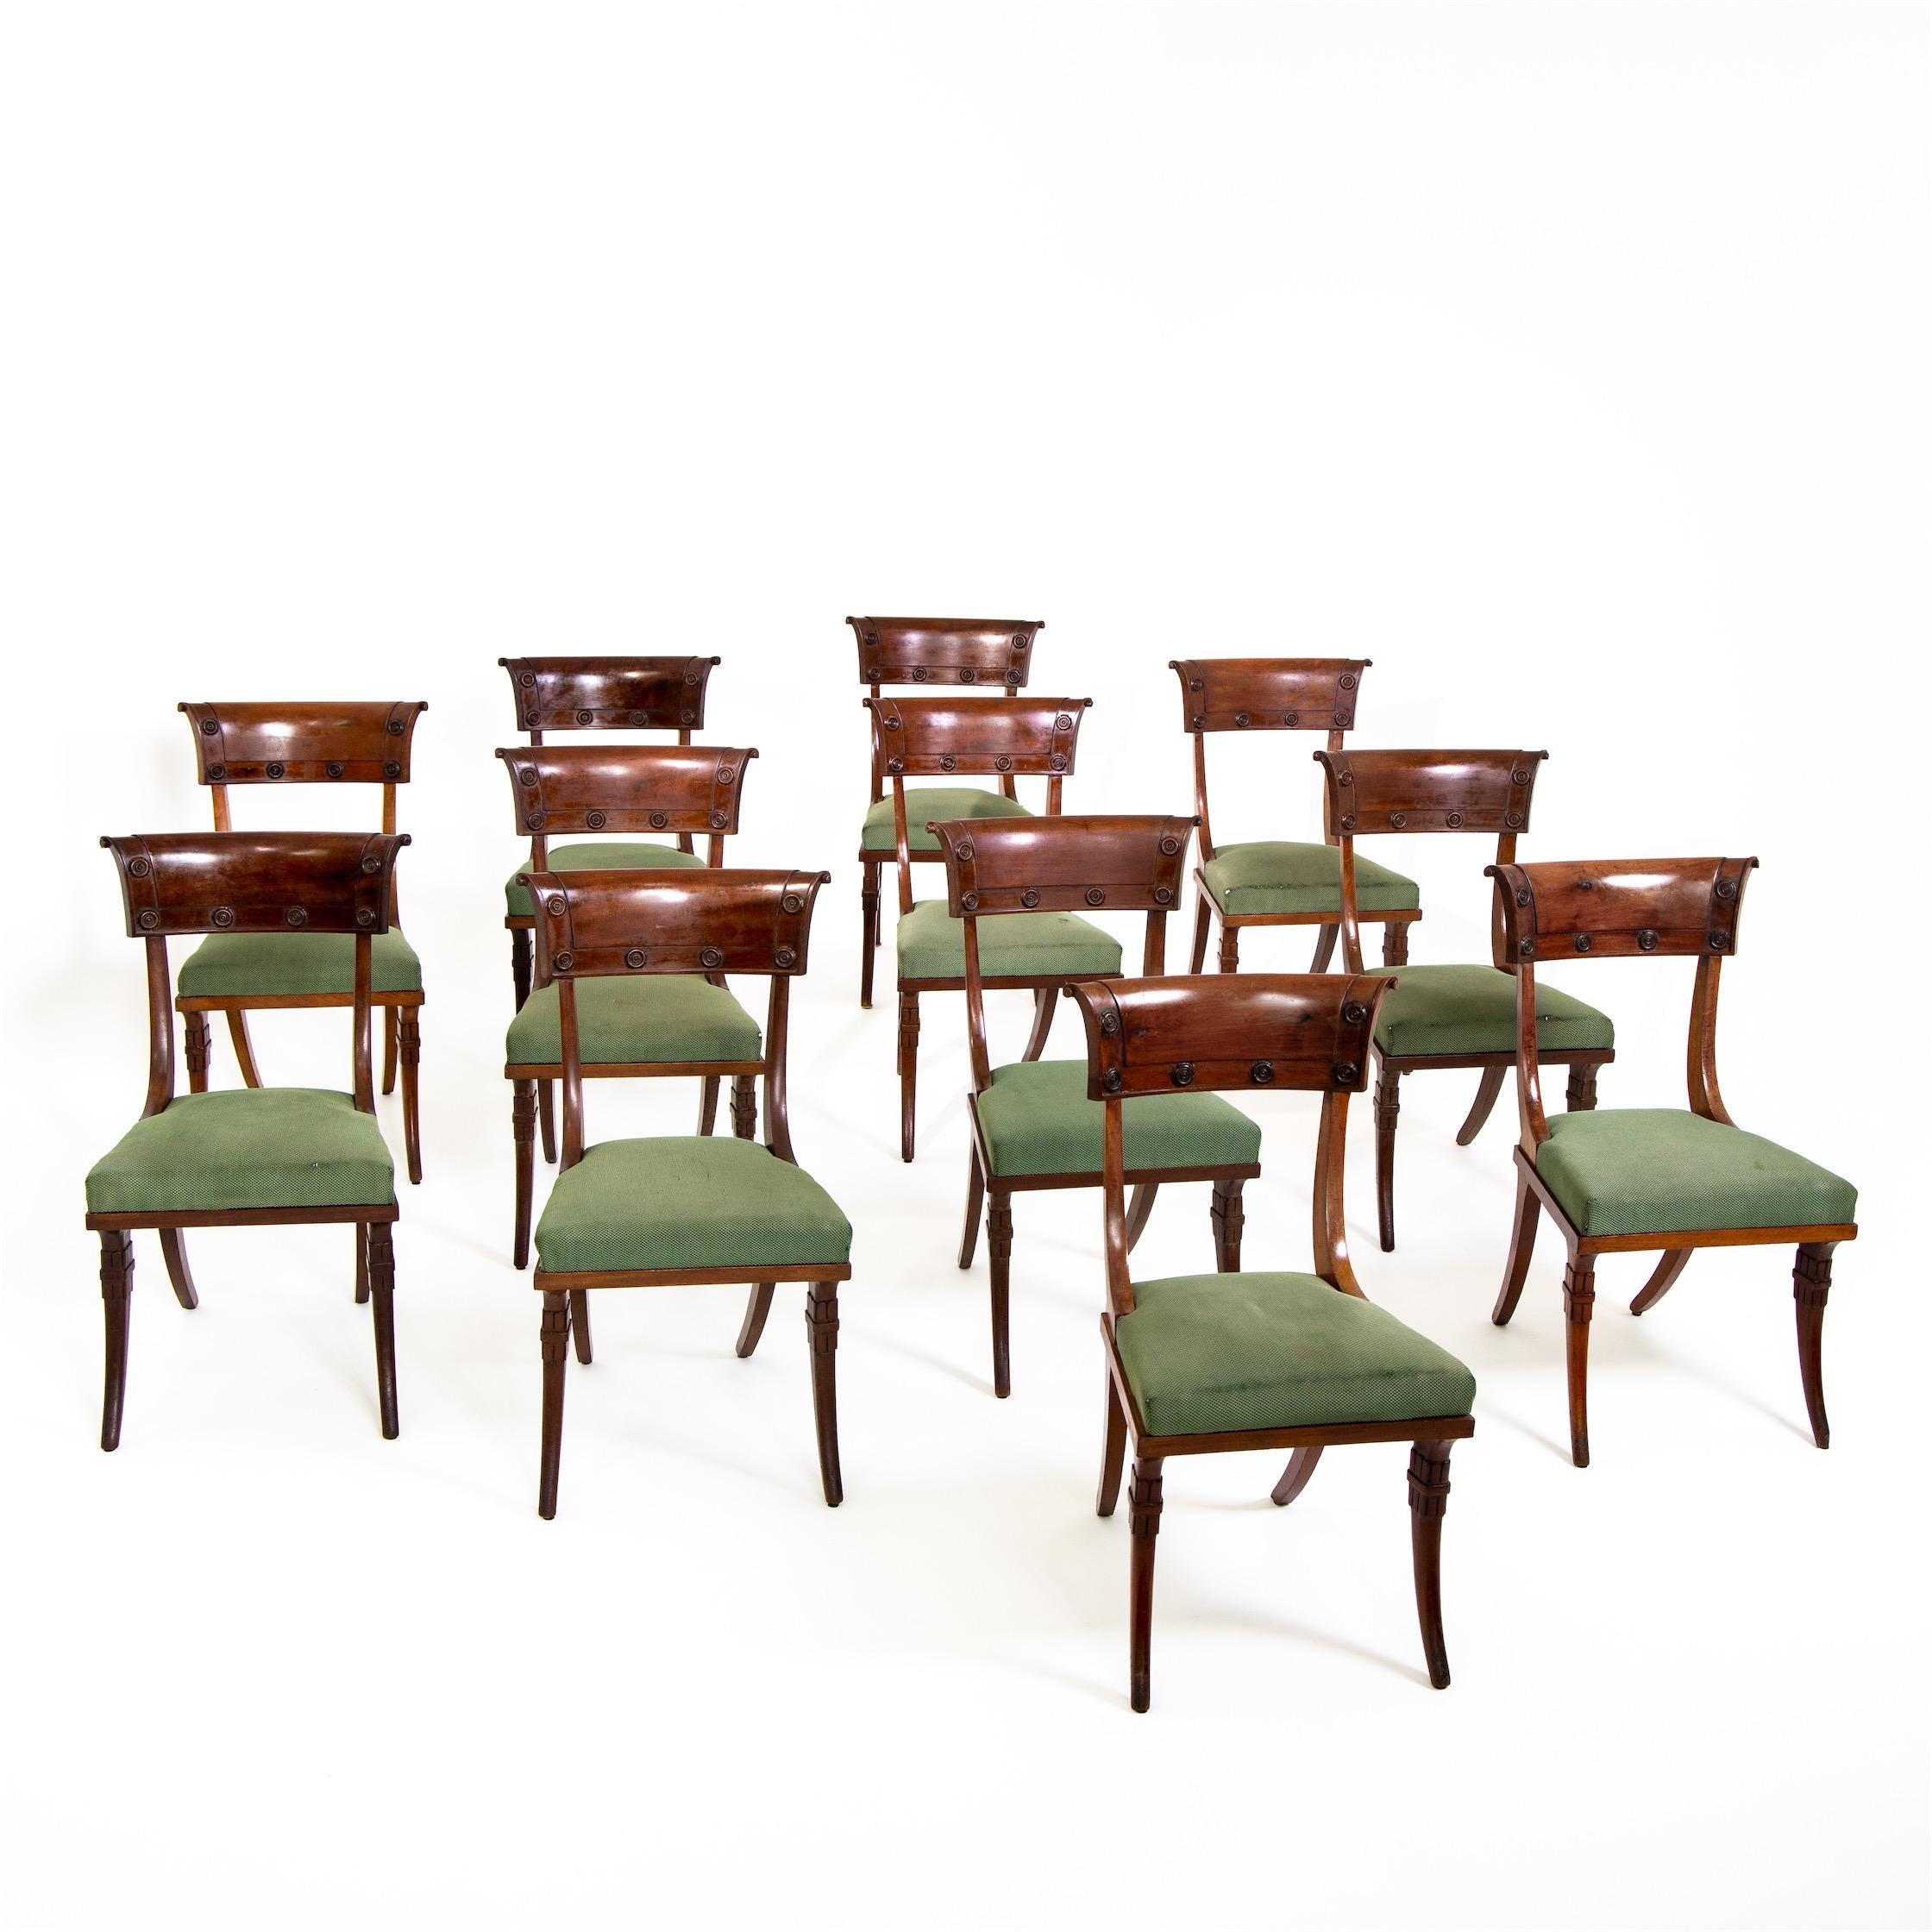 Set of 12 Directoire chairs in unrestored condition. The design echoes the Greek Klismos chair with strongly flared conical pointed legs on both sides and the reduced backrest with rounded board with disc ornaments.